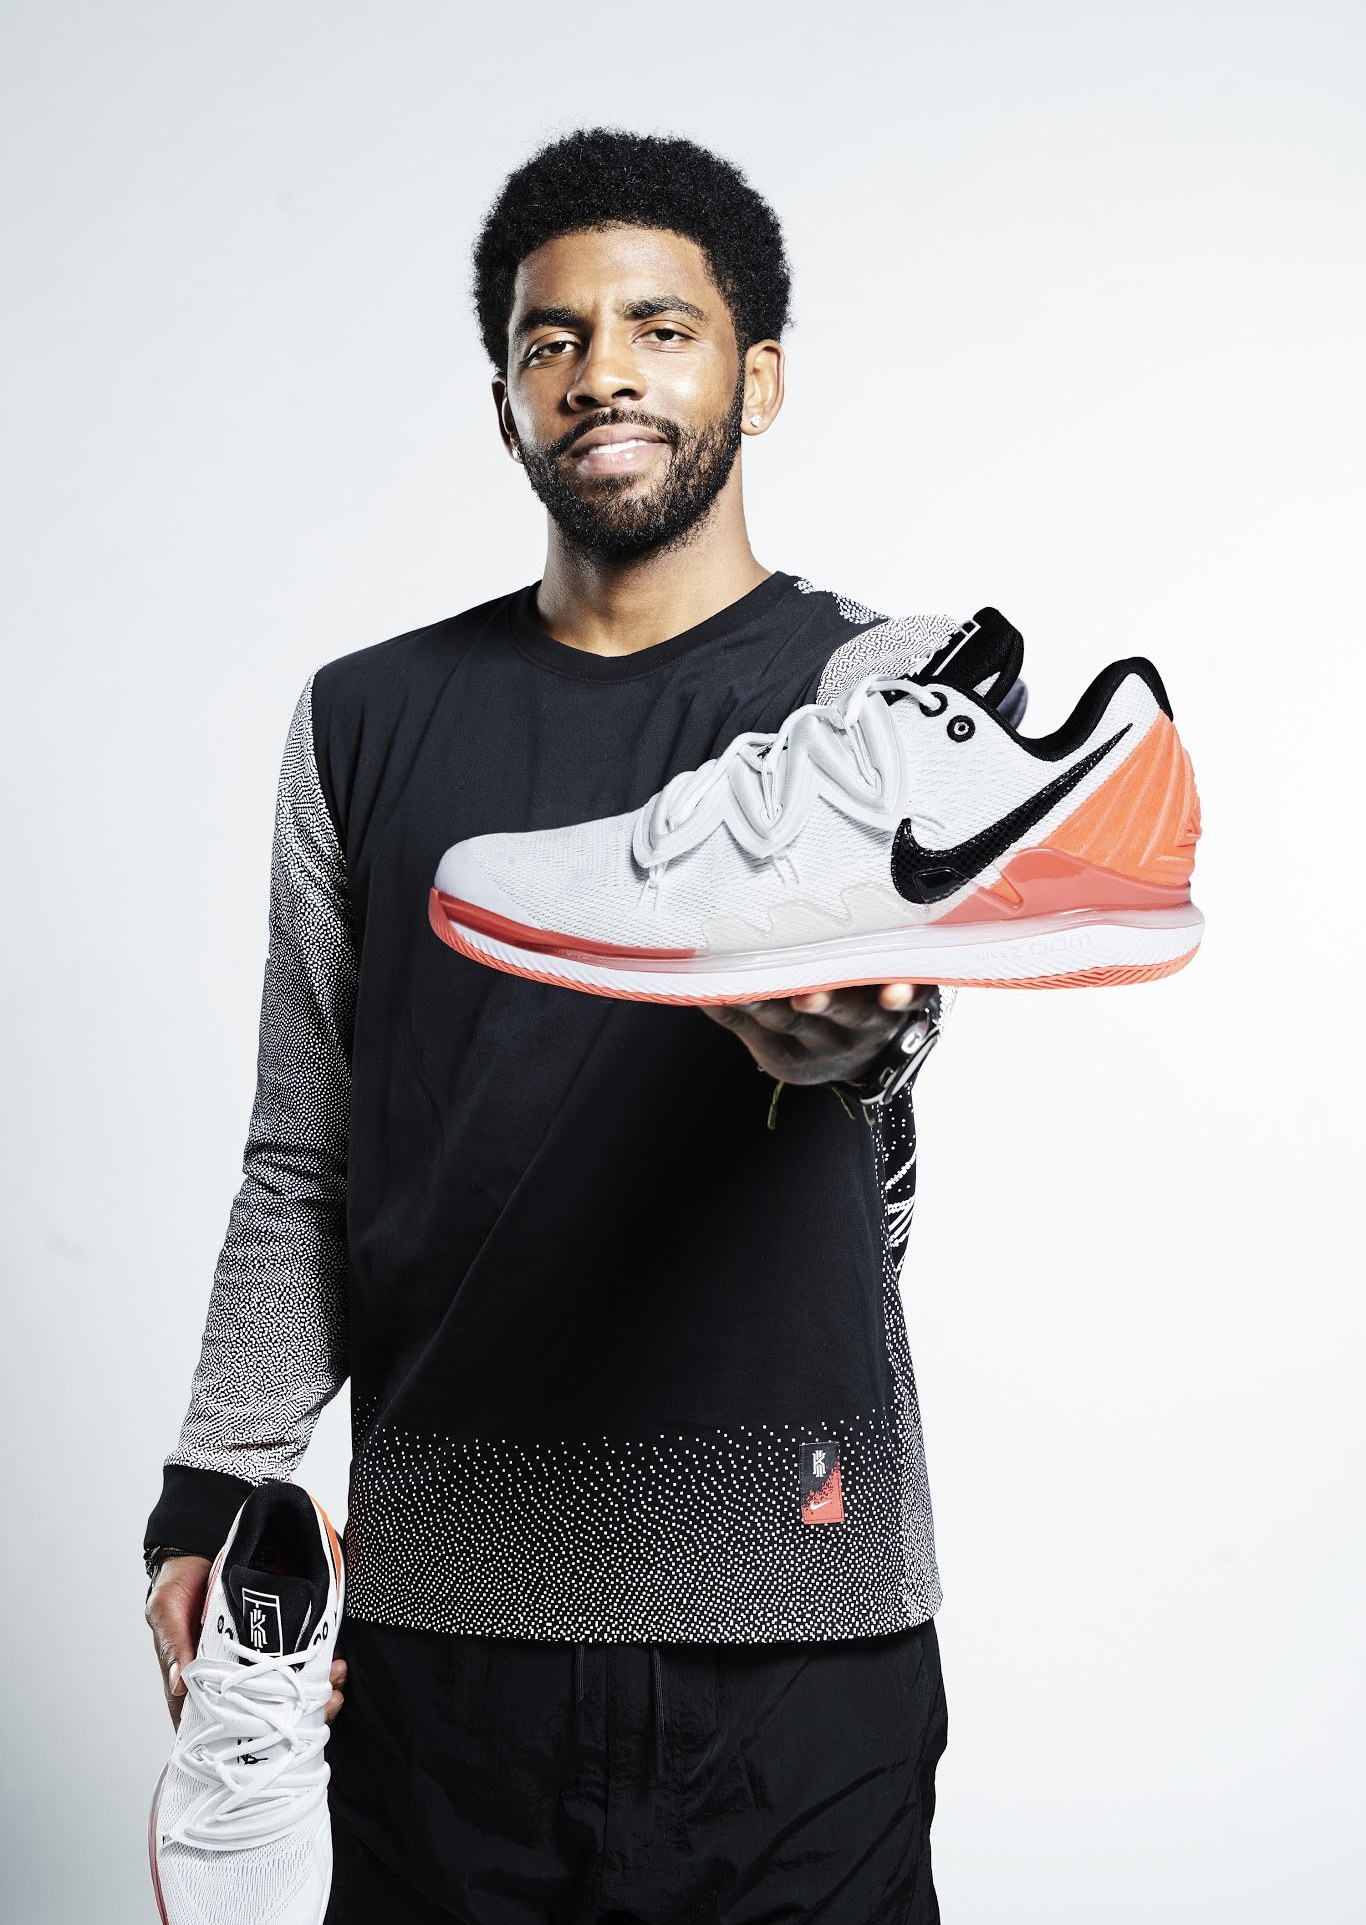 Kyrie Irving's Next Collab Is With a Tennis Star | Complex